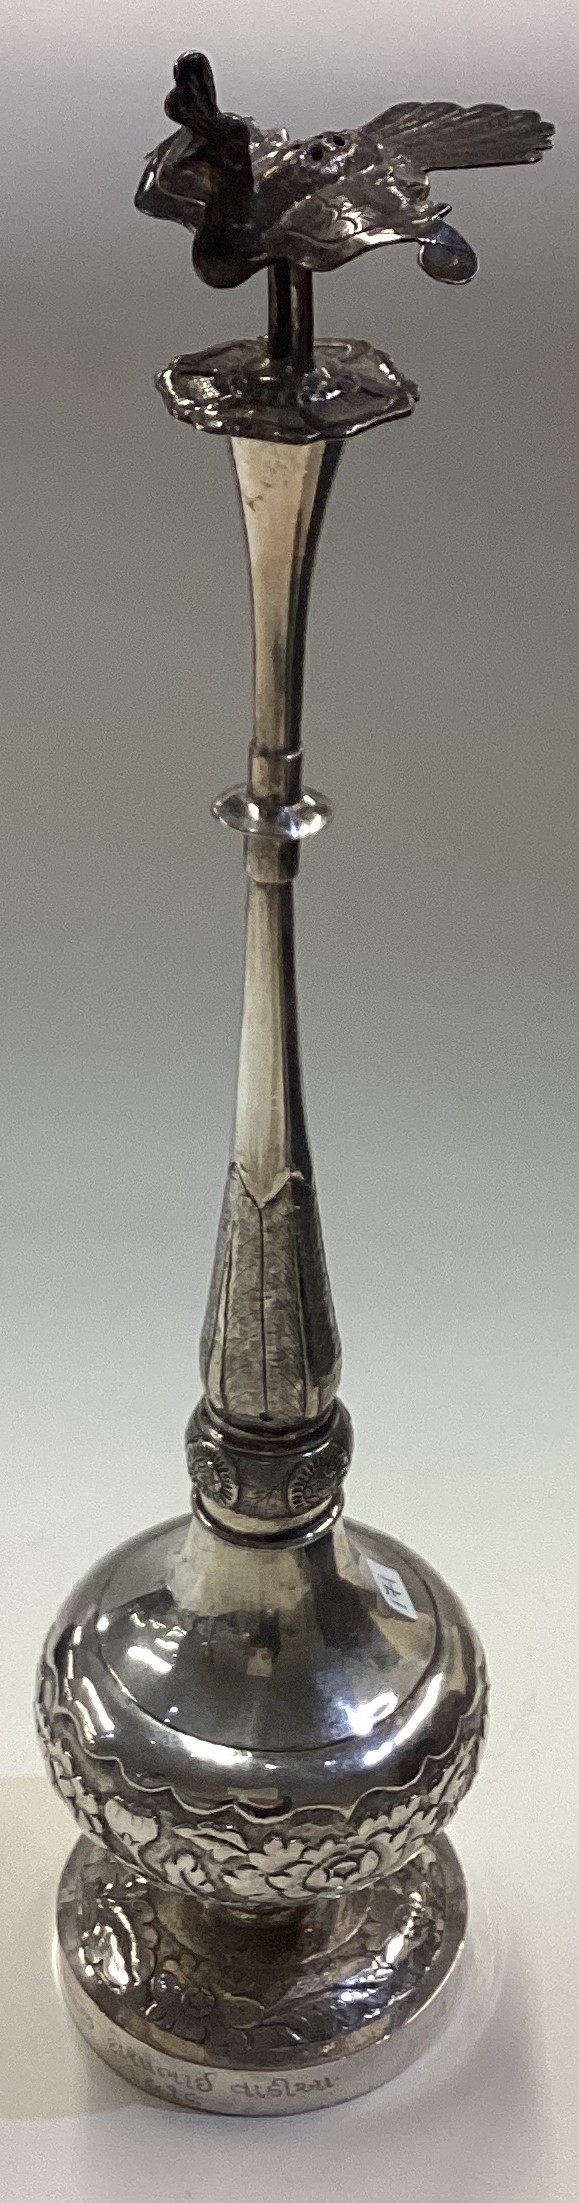 A large early 19th Century Chinese silver rose water sprinkler.